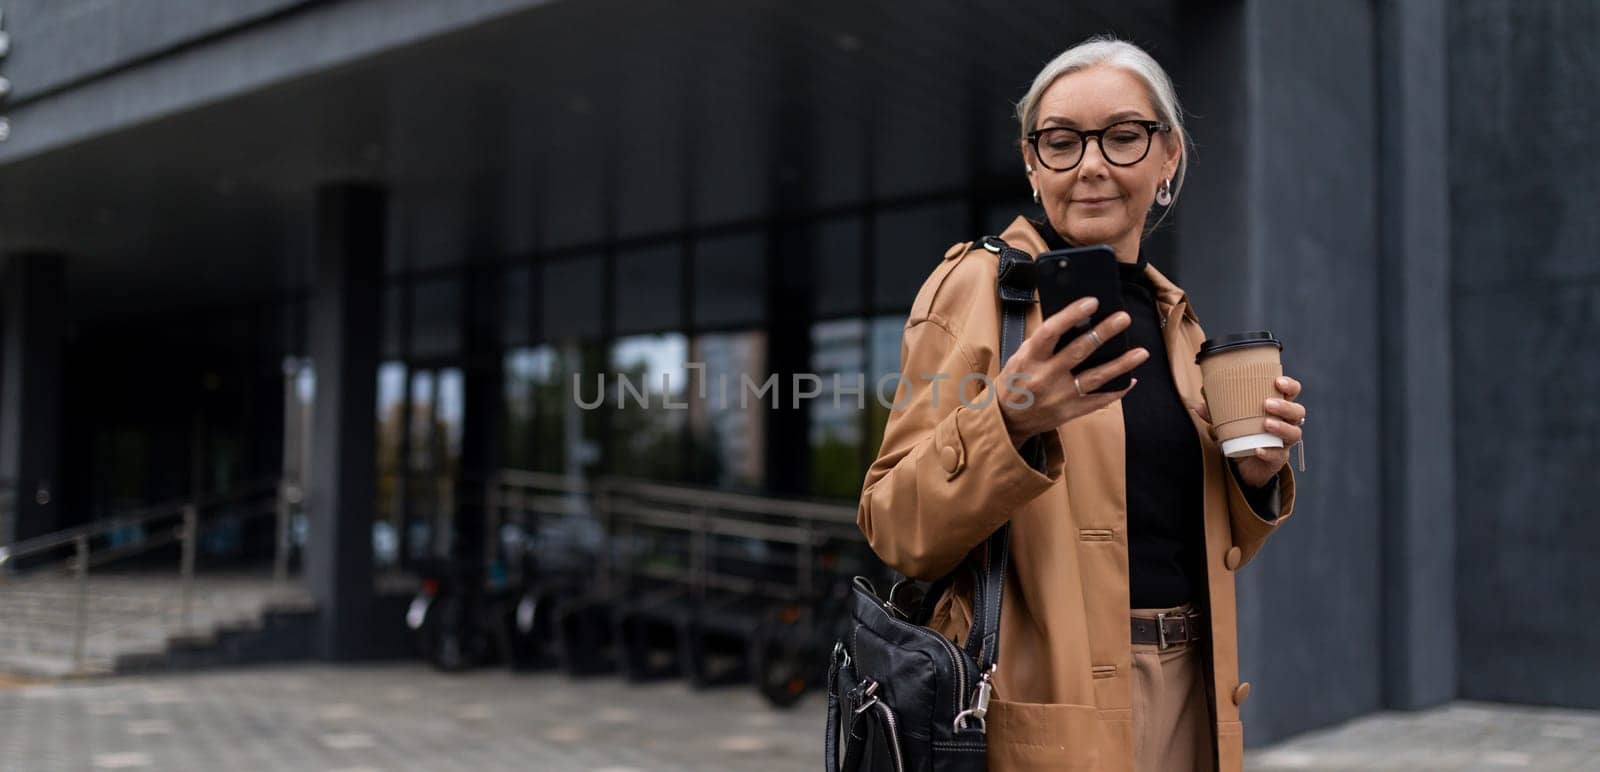 a mature adult female director with gray hair during a break with a phone stands against the backdrop of a business center.